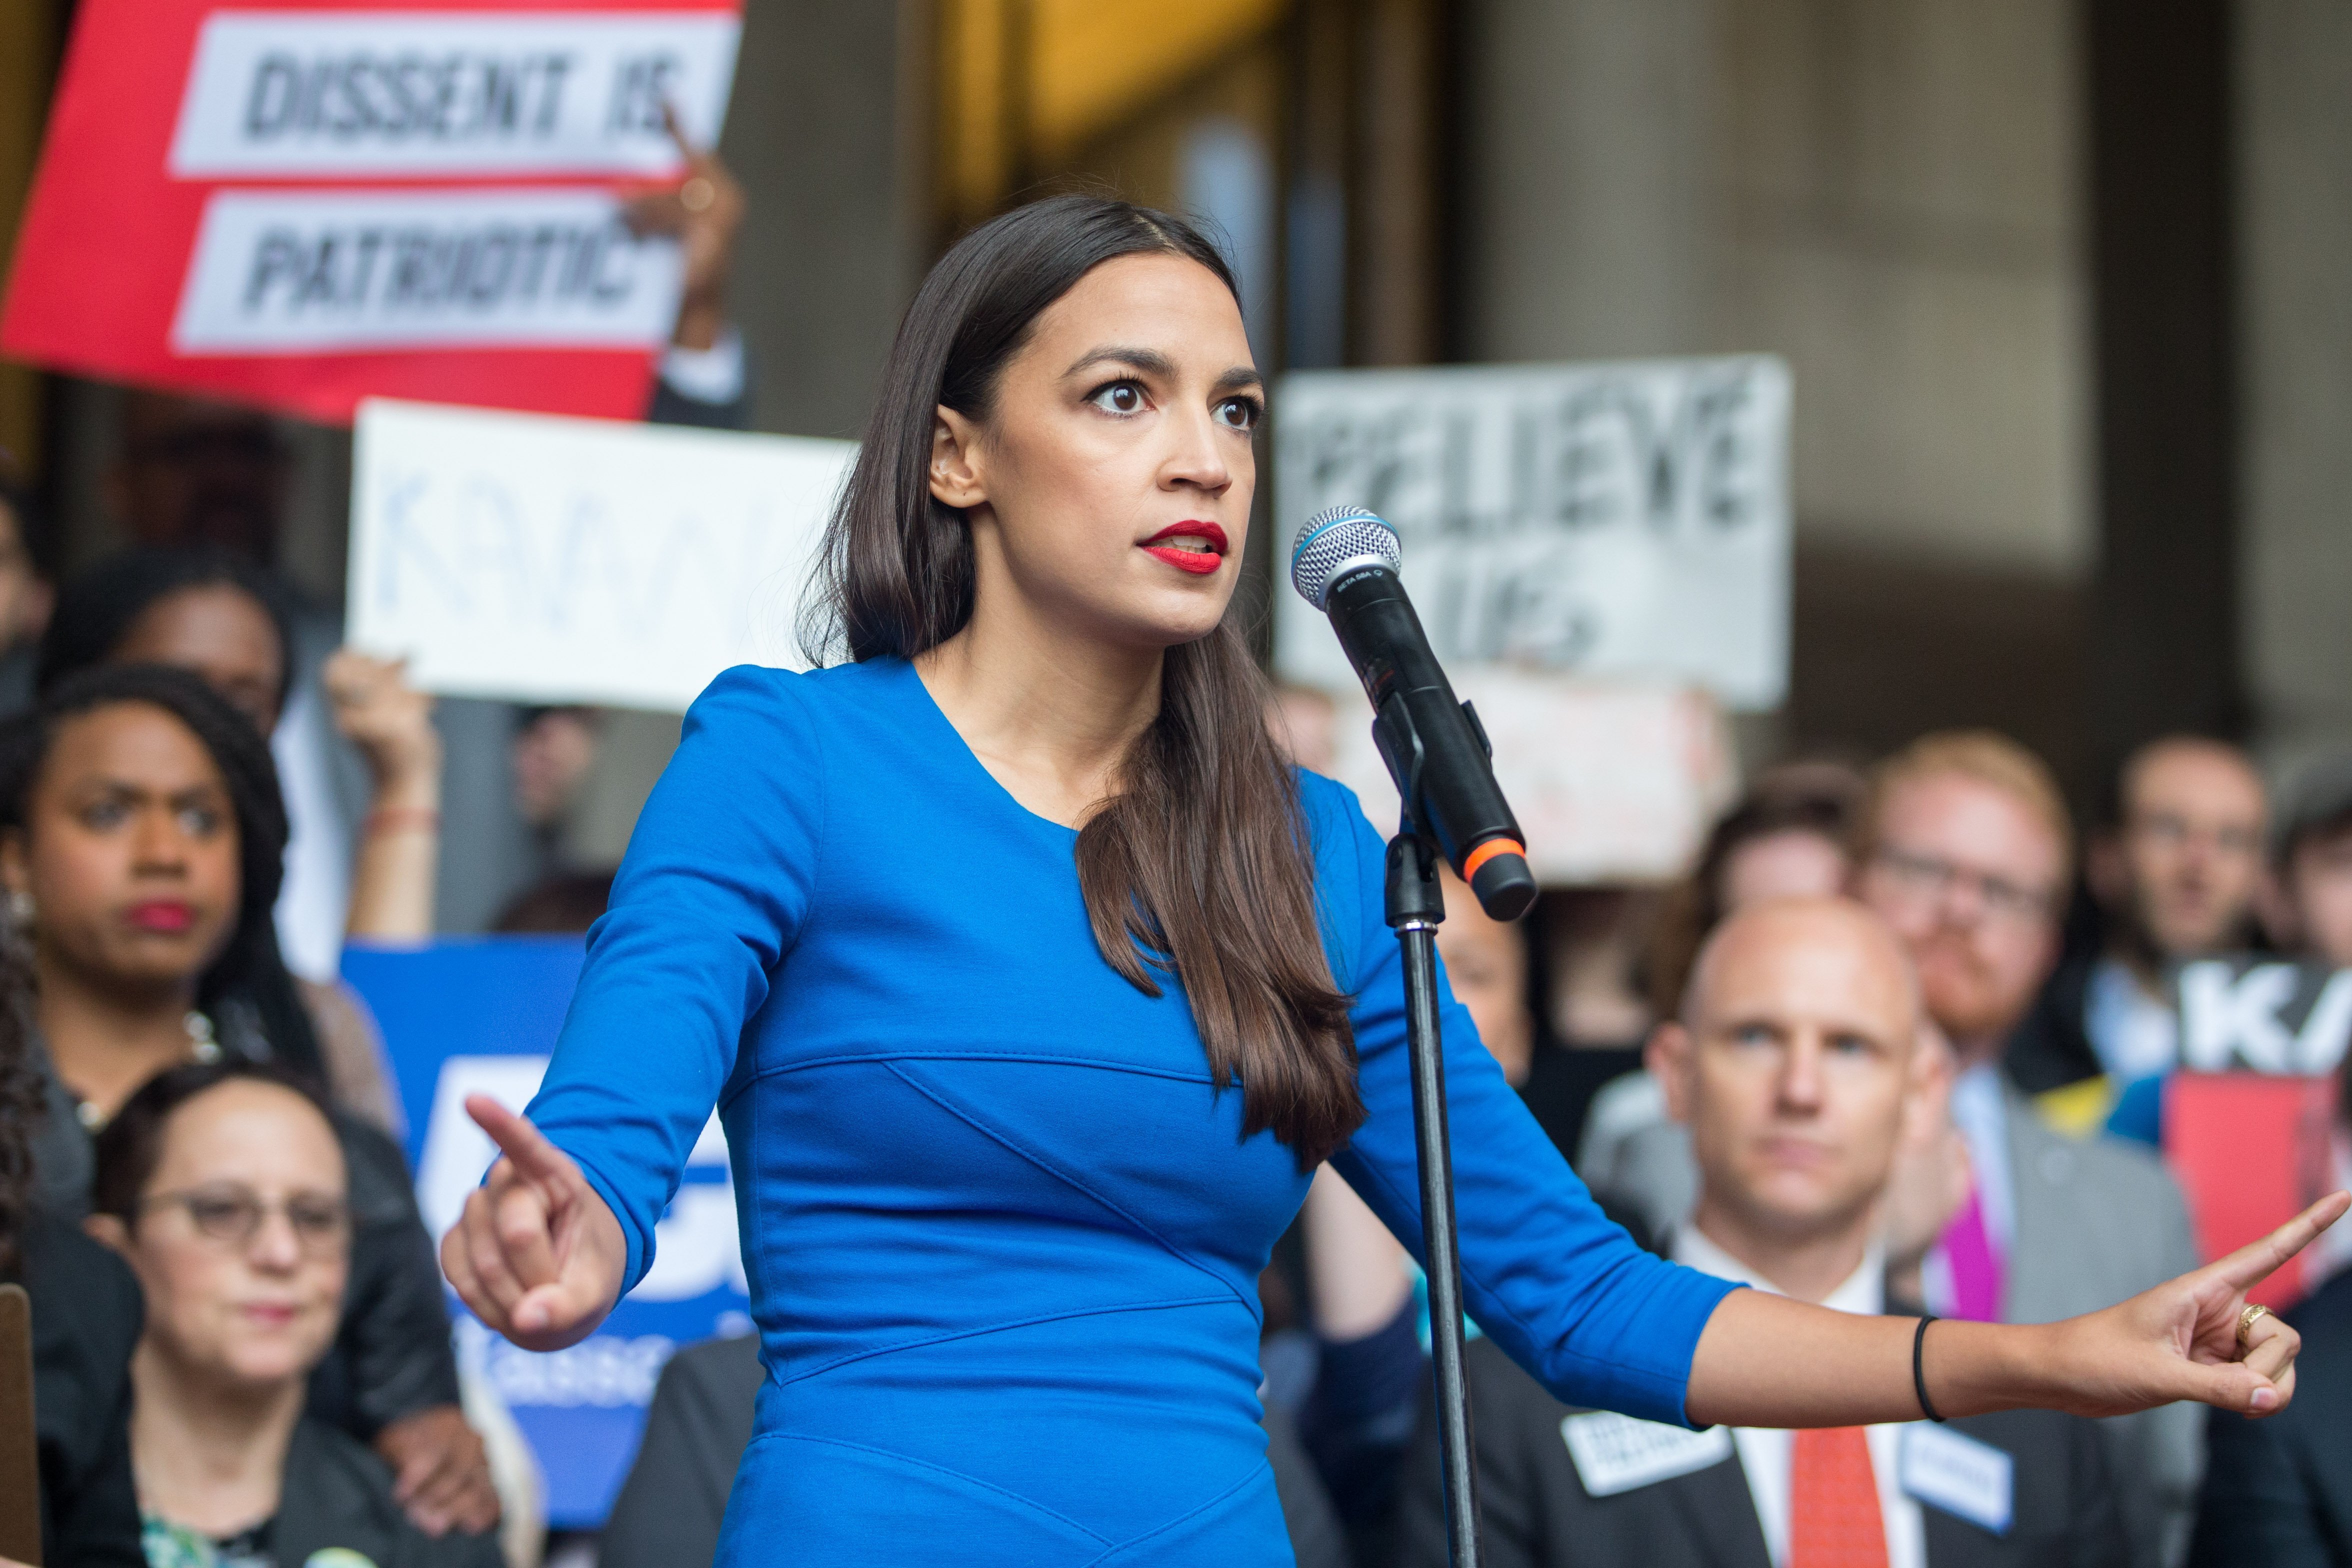 Alexandria Ocasio-Cortez at a campaign rally  | Photo credit: Getty Images